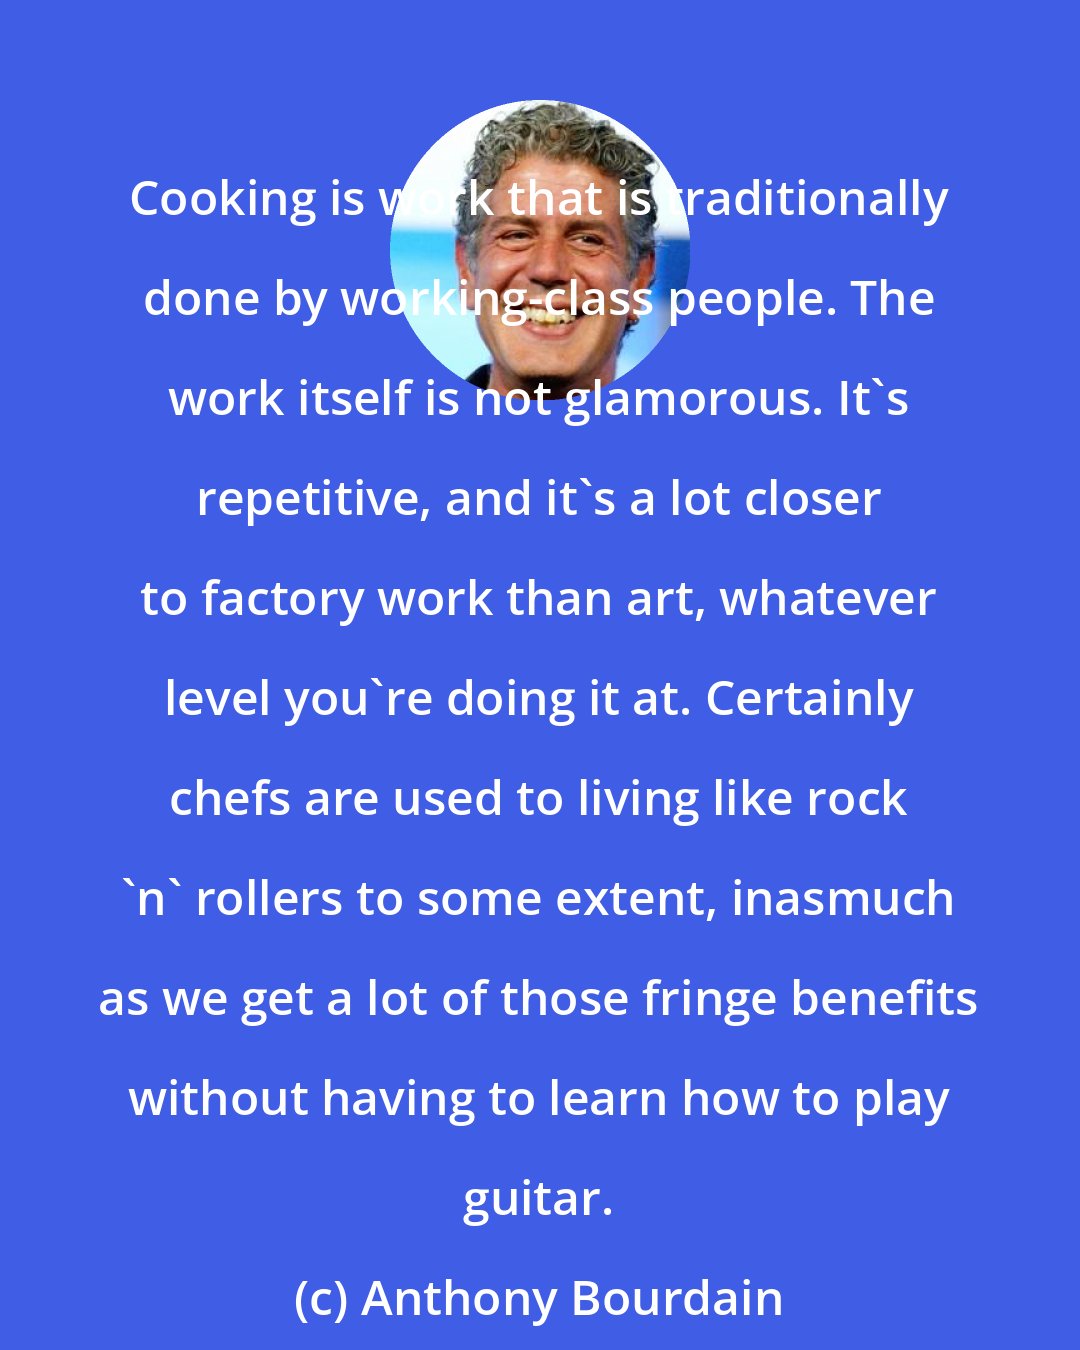 Anthony Bourdain: Cooking is work that is traditionally done by working-class people. The work itself is not glamorous. It's repetitive, and it's a lot closer to factory work than art, whatever level you're doing it at. Certainly chefs are used to living like rock 'n' rollers to some extent, inasmuch as we get a lot of those fringe benefits without having to learn how to play guitar.